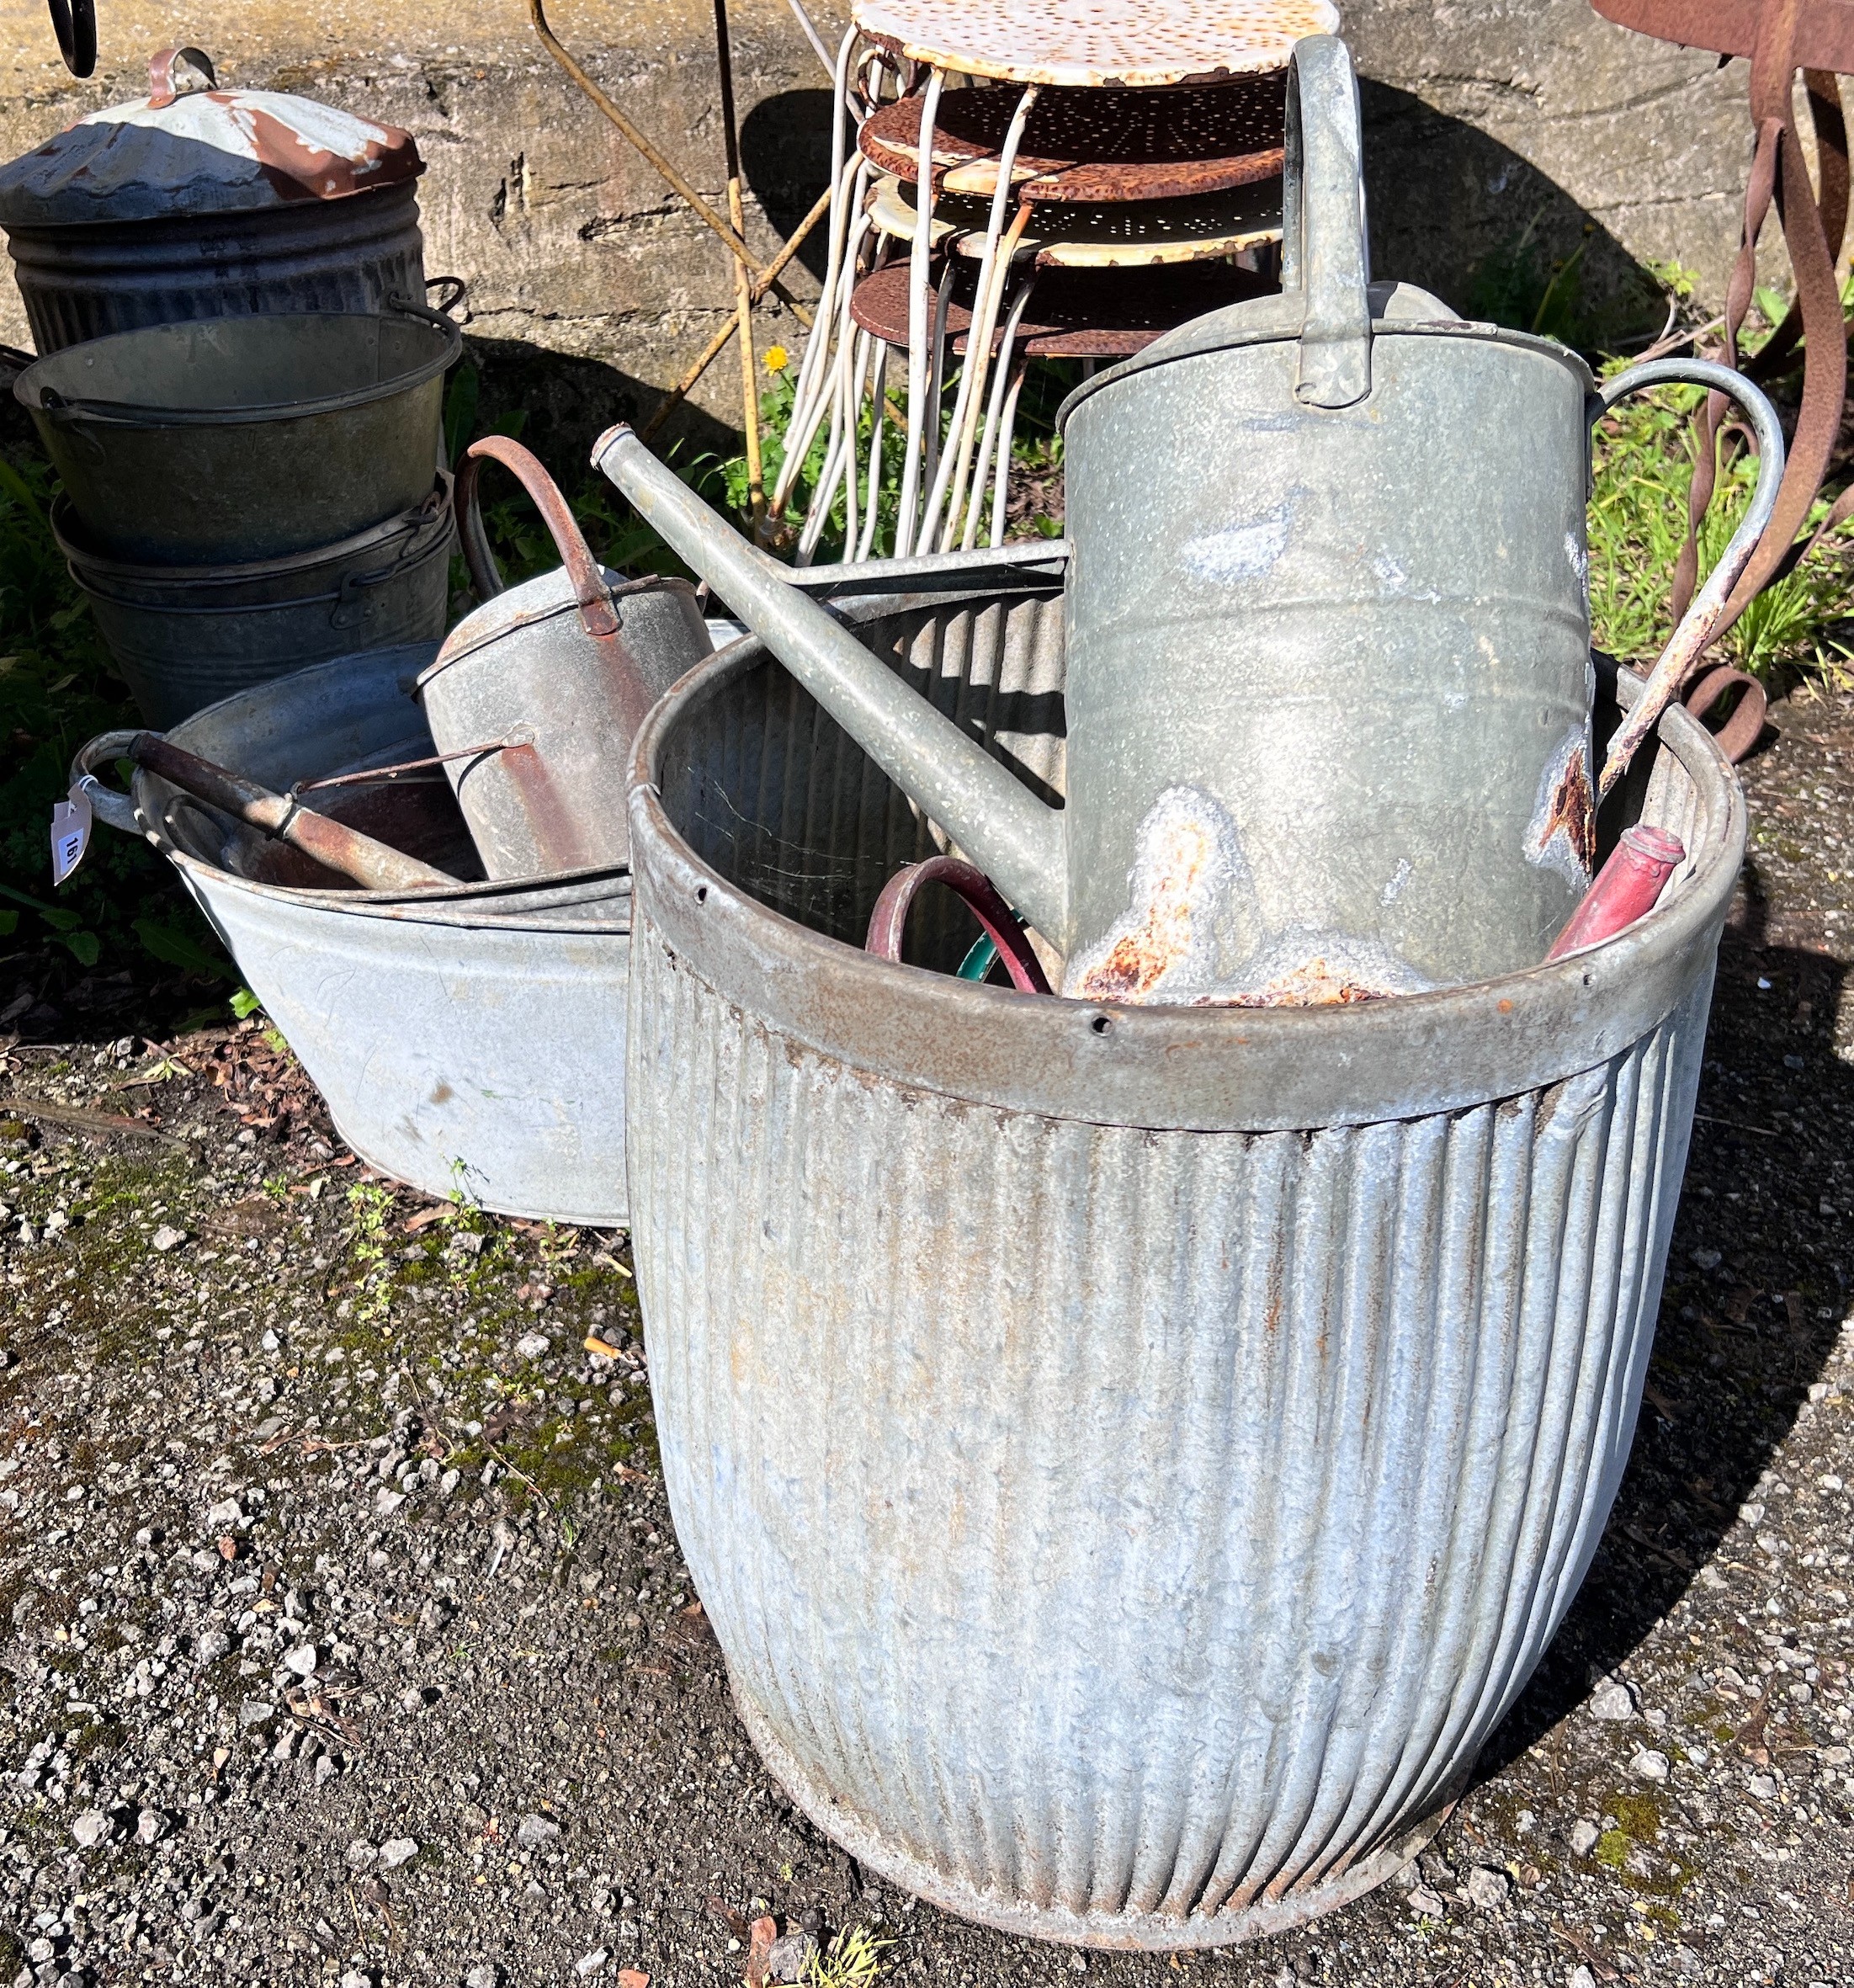 Ten assorted galvanised containers, watering cans, etc. *Please note the sale commences at 9am.